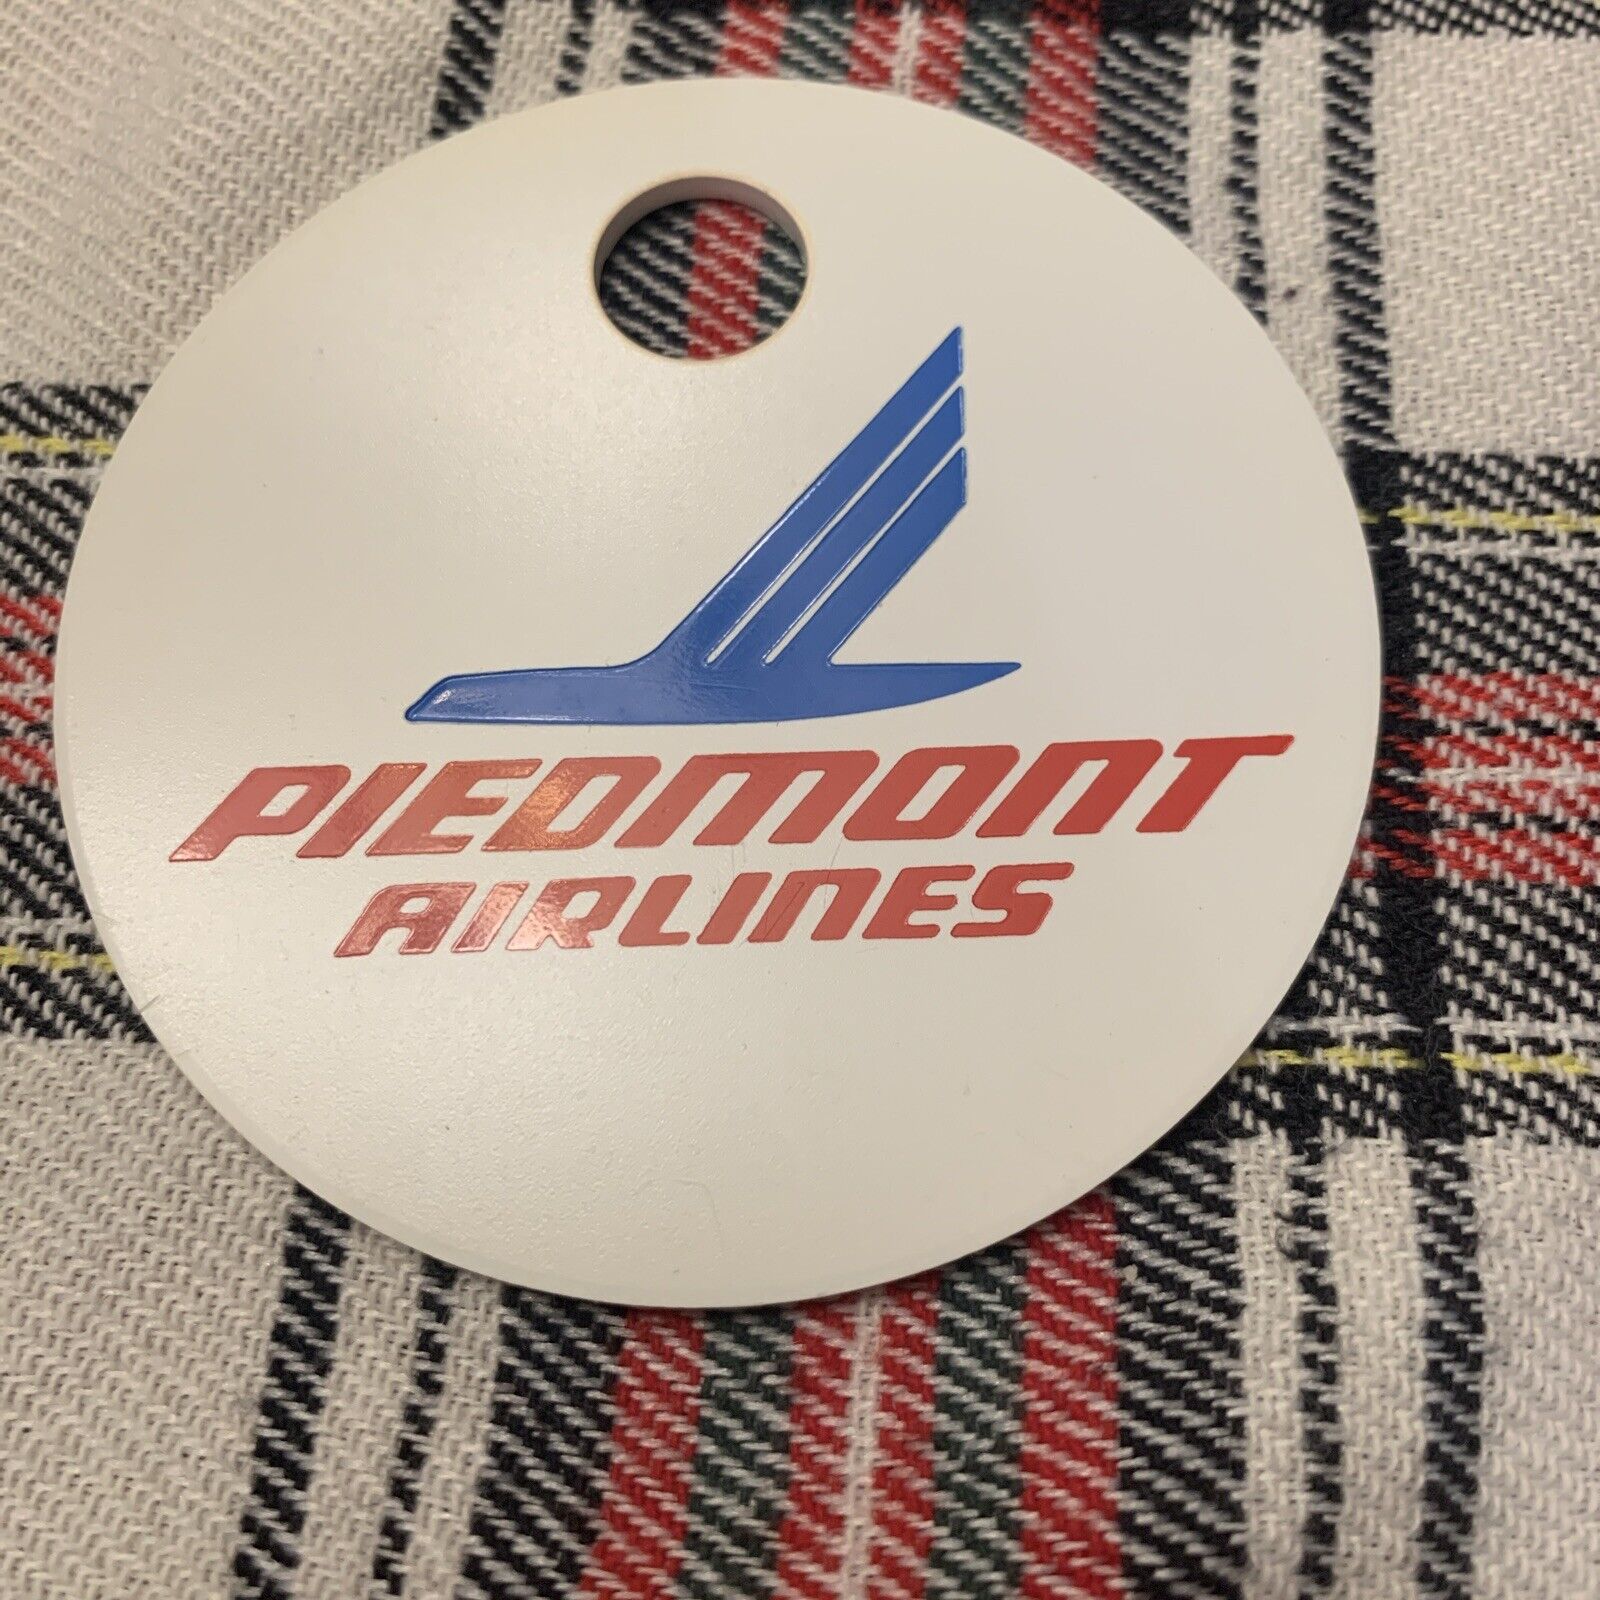 Vintage Piedmont Airlines Luggage Tag US Air Rare and Hard to Find